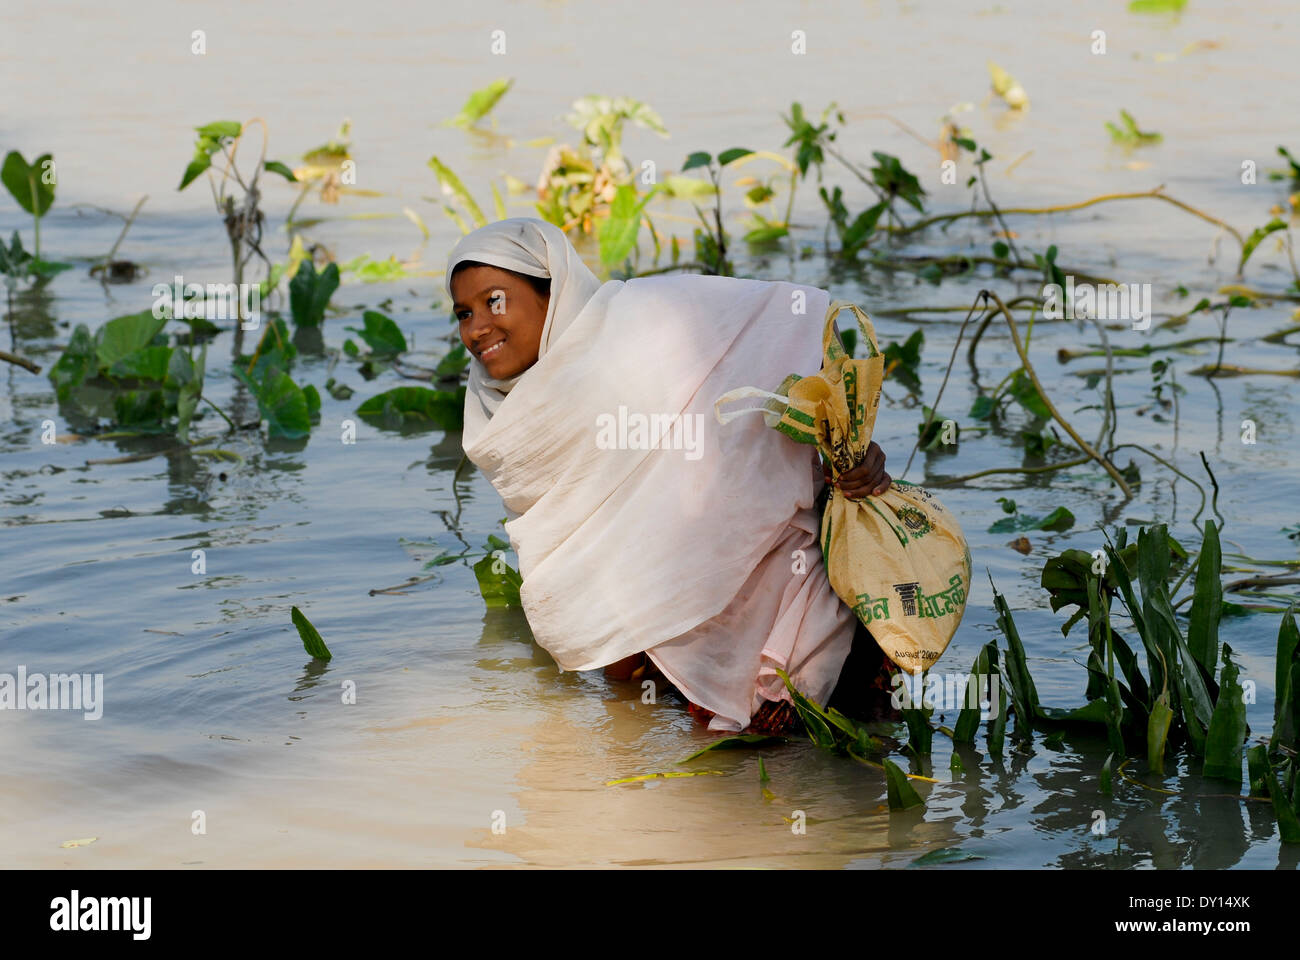 BANGLADESH District Bagerhat , cyclone Sidr and high tide destroy villages in South khali, river Balaswar, distribution of relief goods to affected people in villages, girl wading in the water with bags with relief goods Stock Photo